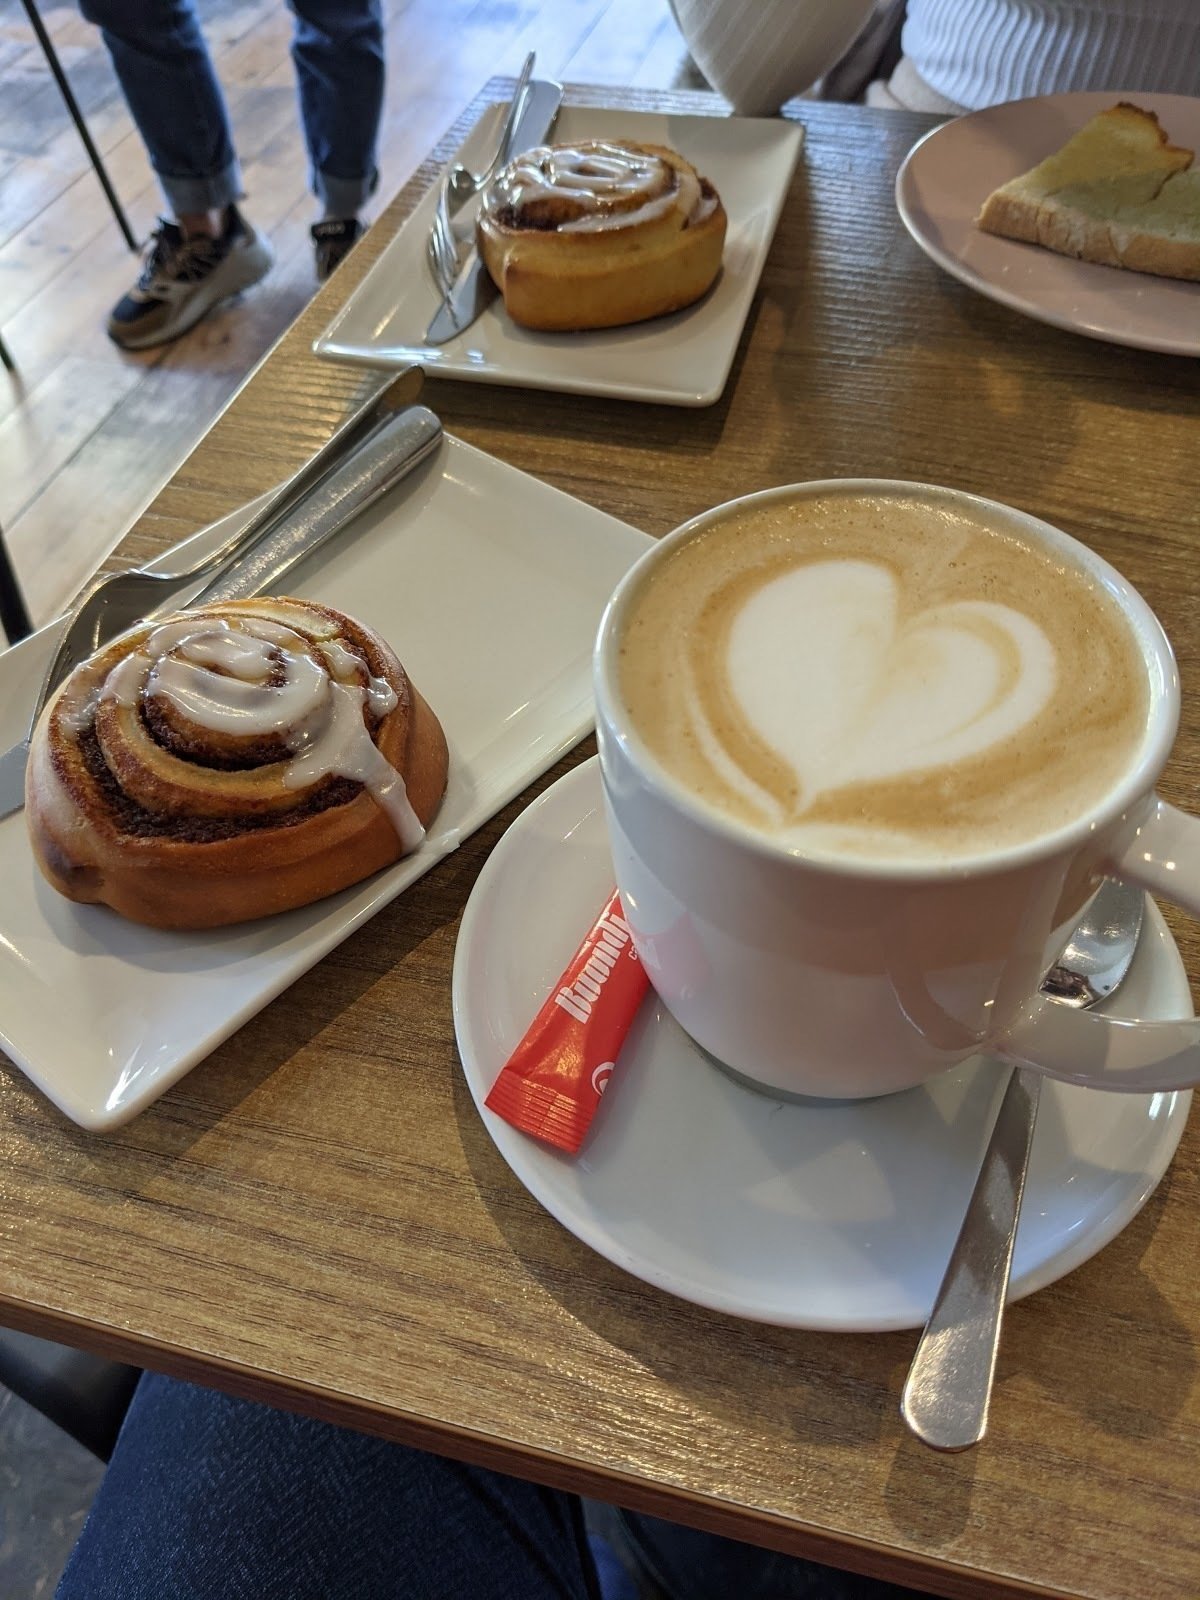 <span class="translation_missing" title="translation missing: en.meta.location_title, location_name: Monlou, Cake and Coffee House, city: Aveiro">Location Title</span>